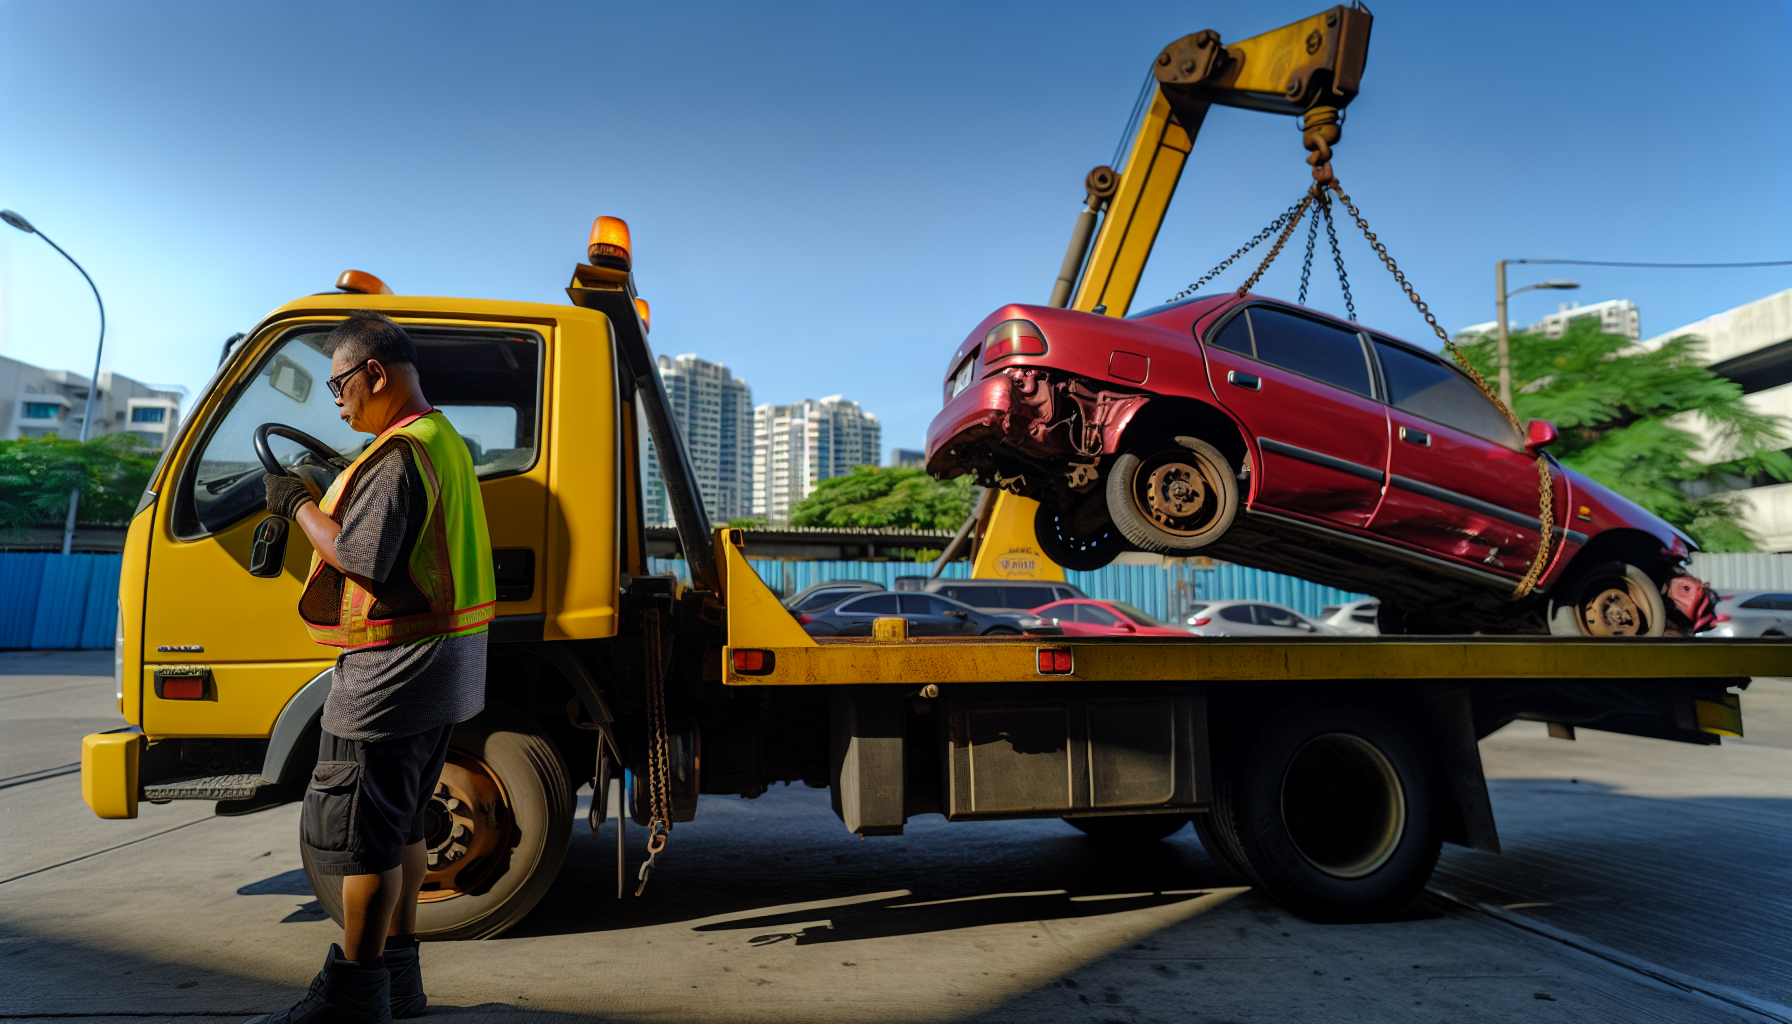 A tow truck picking up a damaged vehicle for free towing